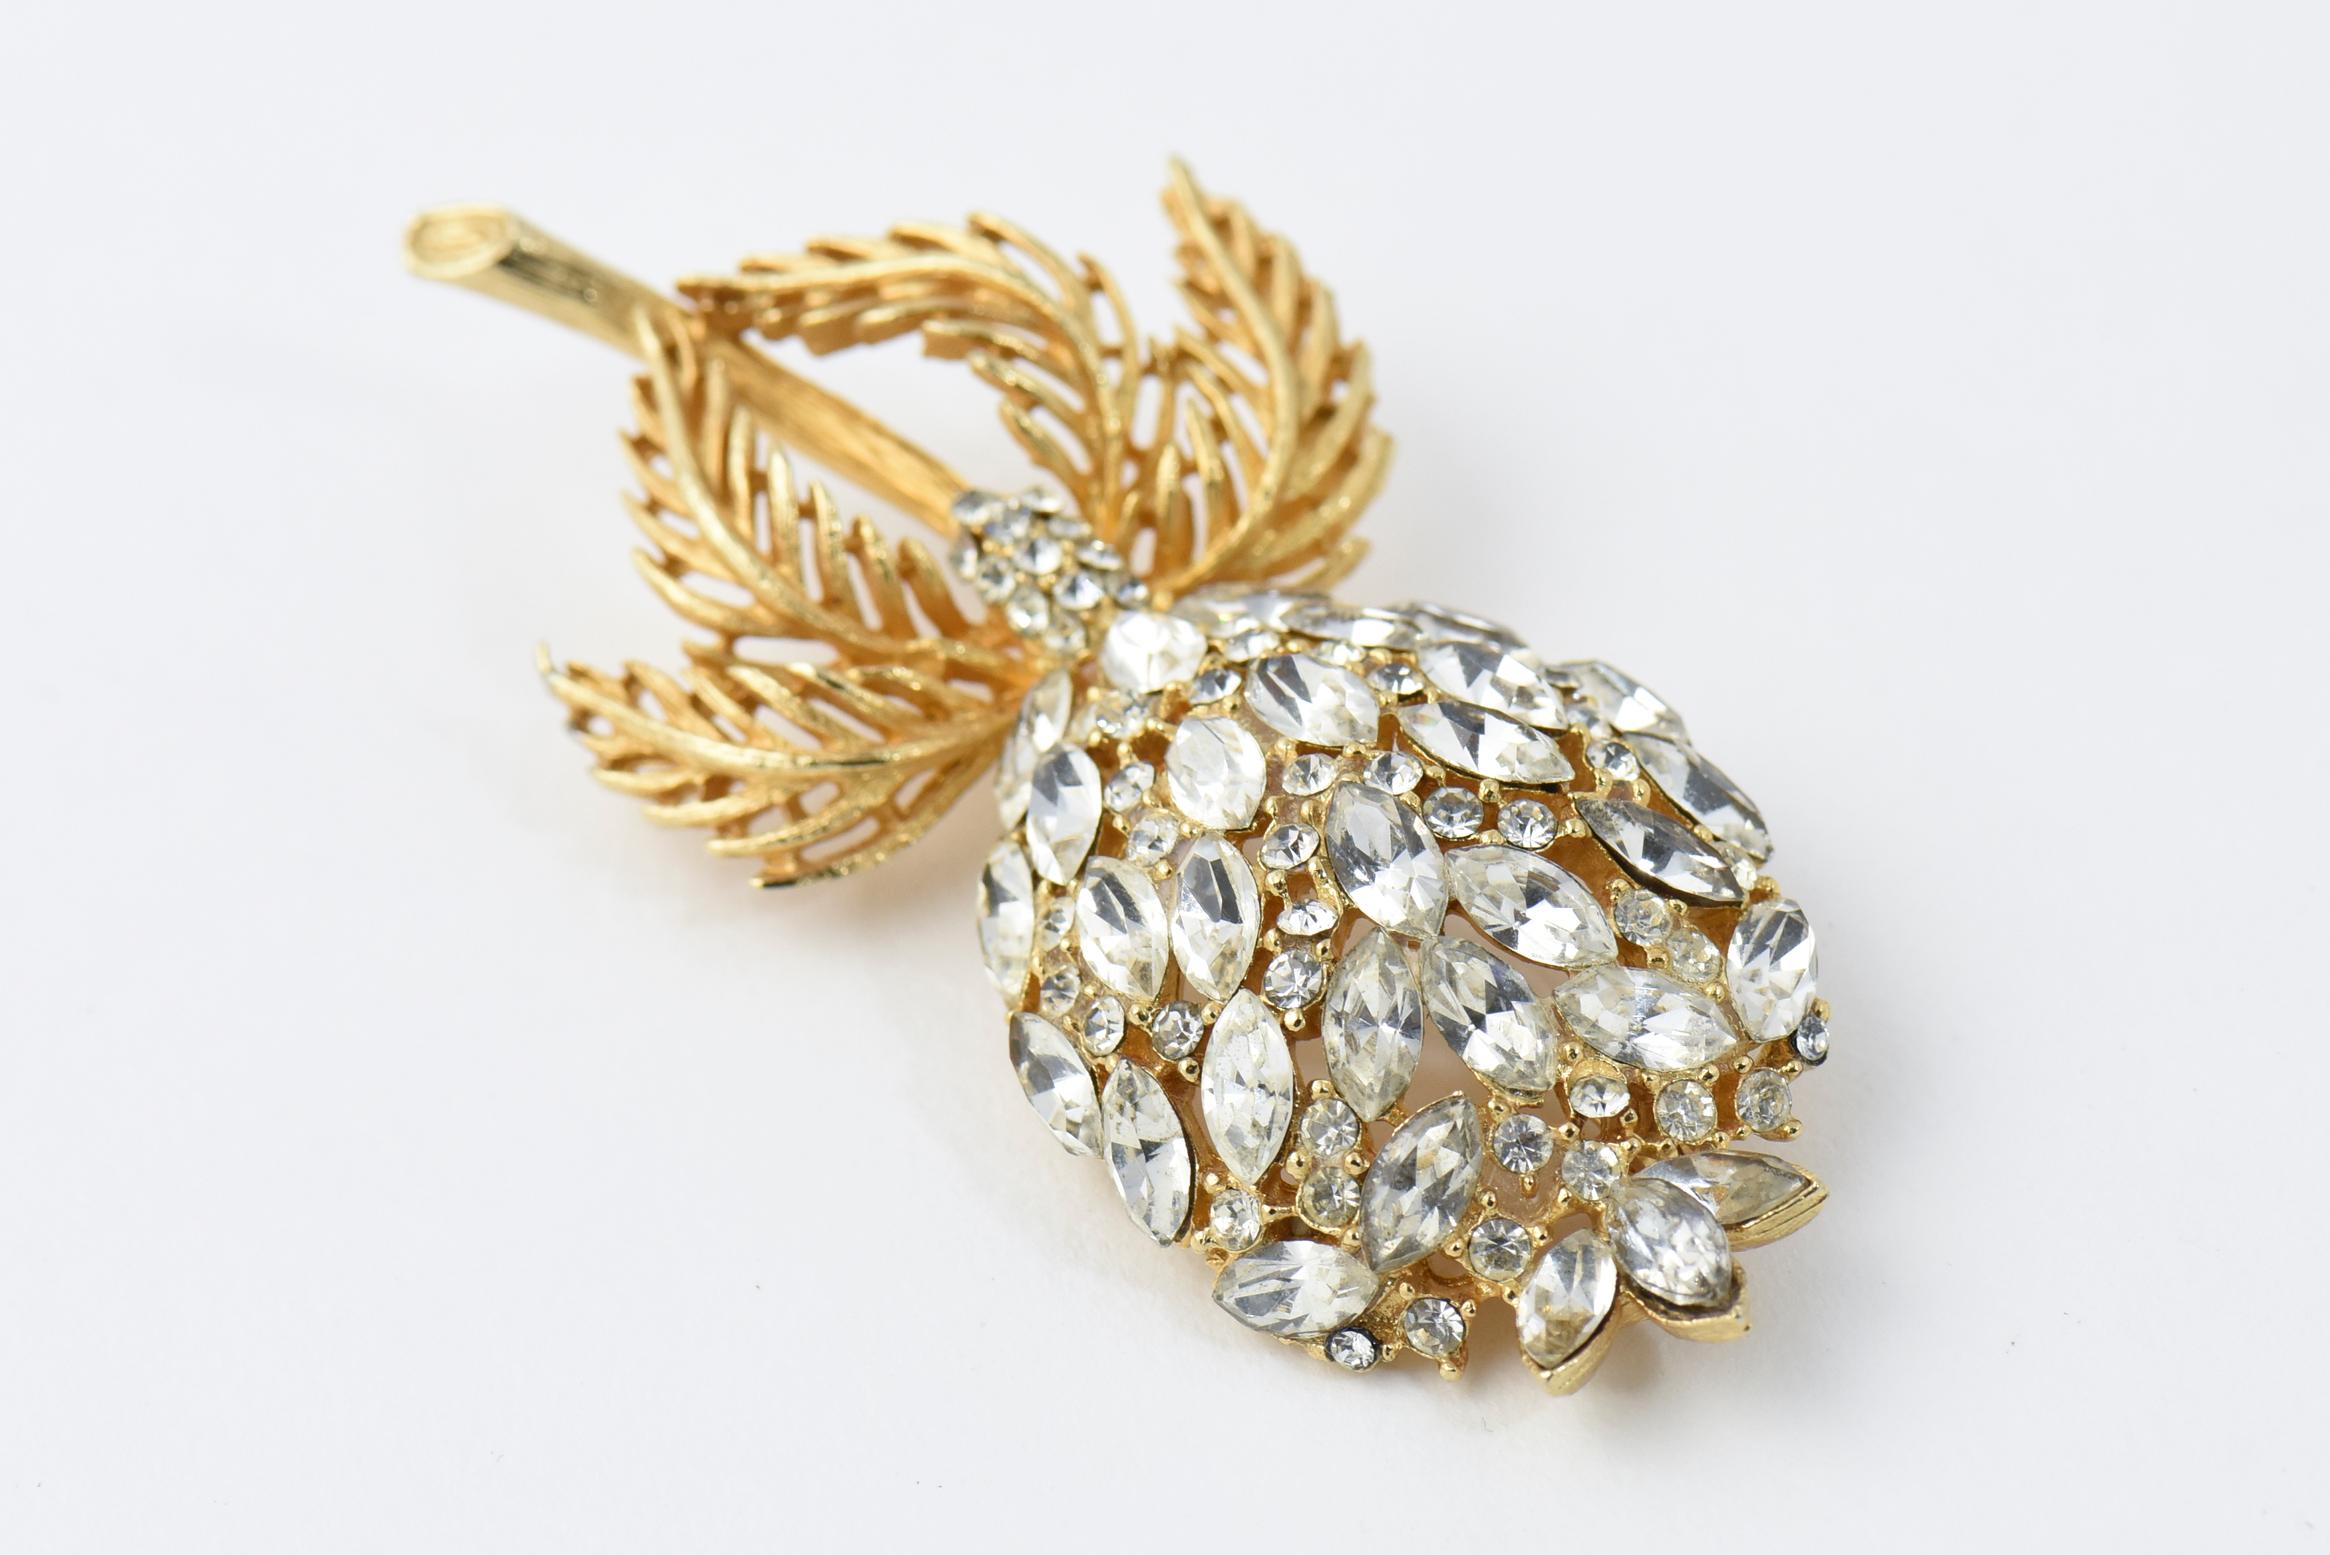 Impressive three dimensional large crystal flower brooch with a gold tone stem and leaves.